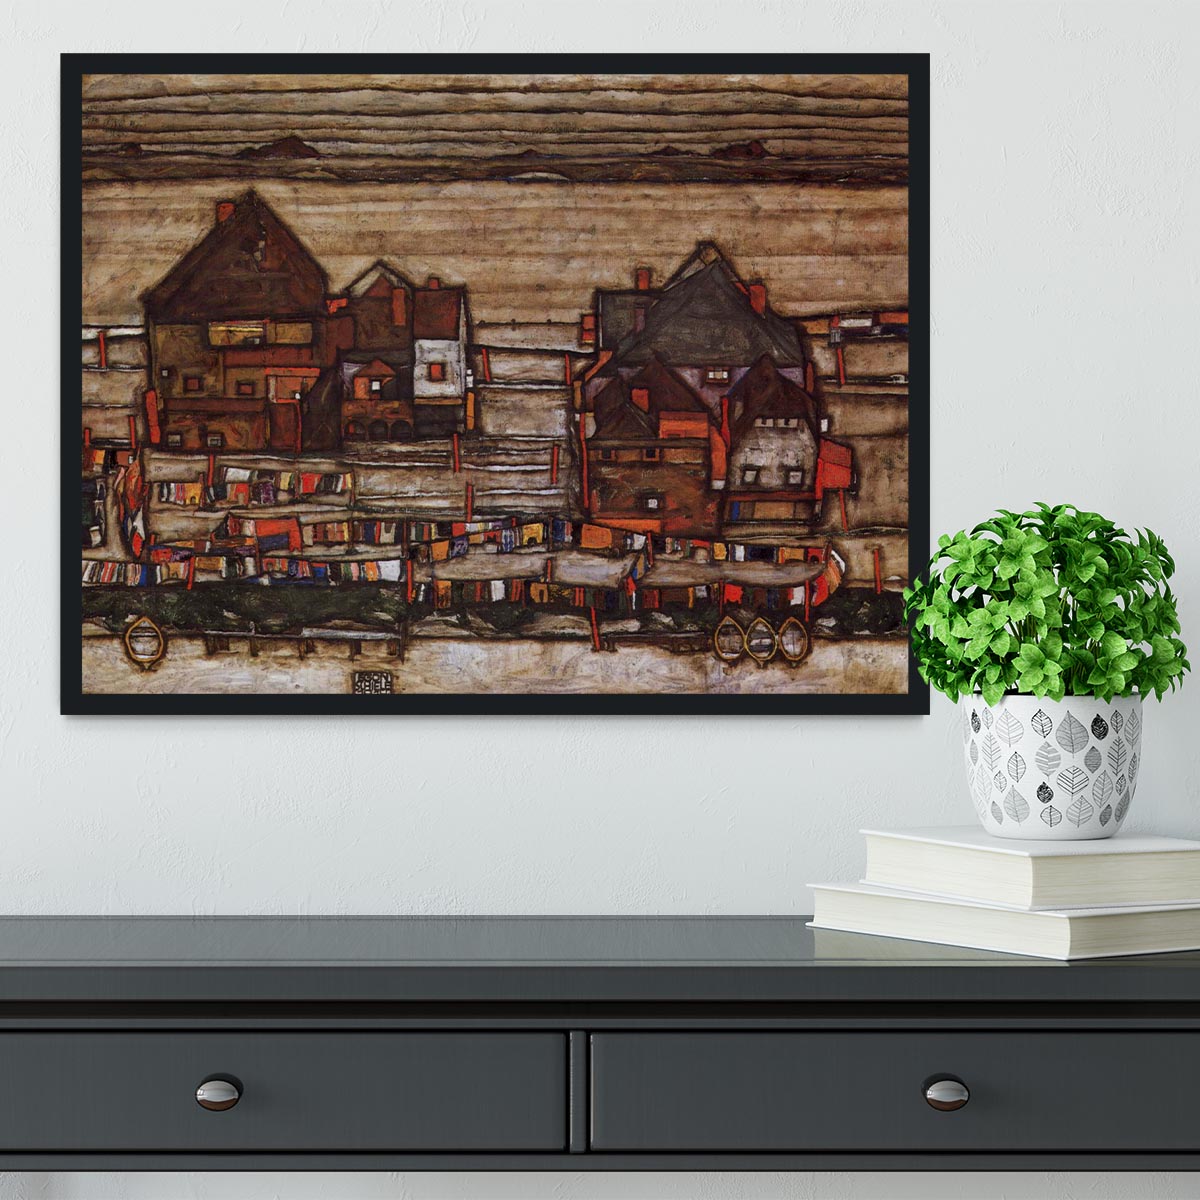 Houses with laundry lines and suburban by Egon Schiele Framed Print - Canvas Art Rocks - 2